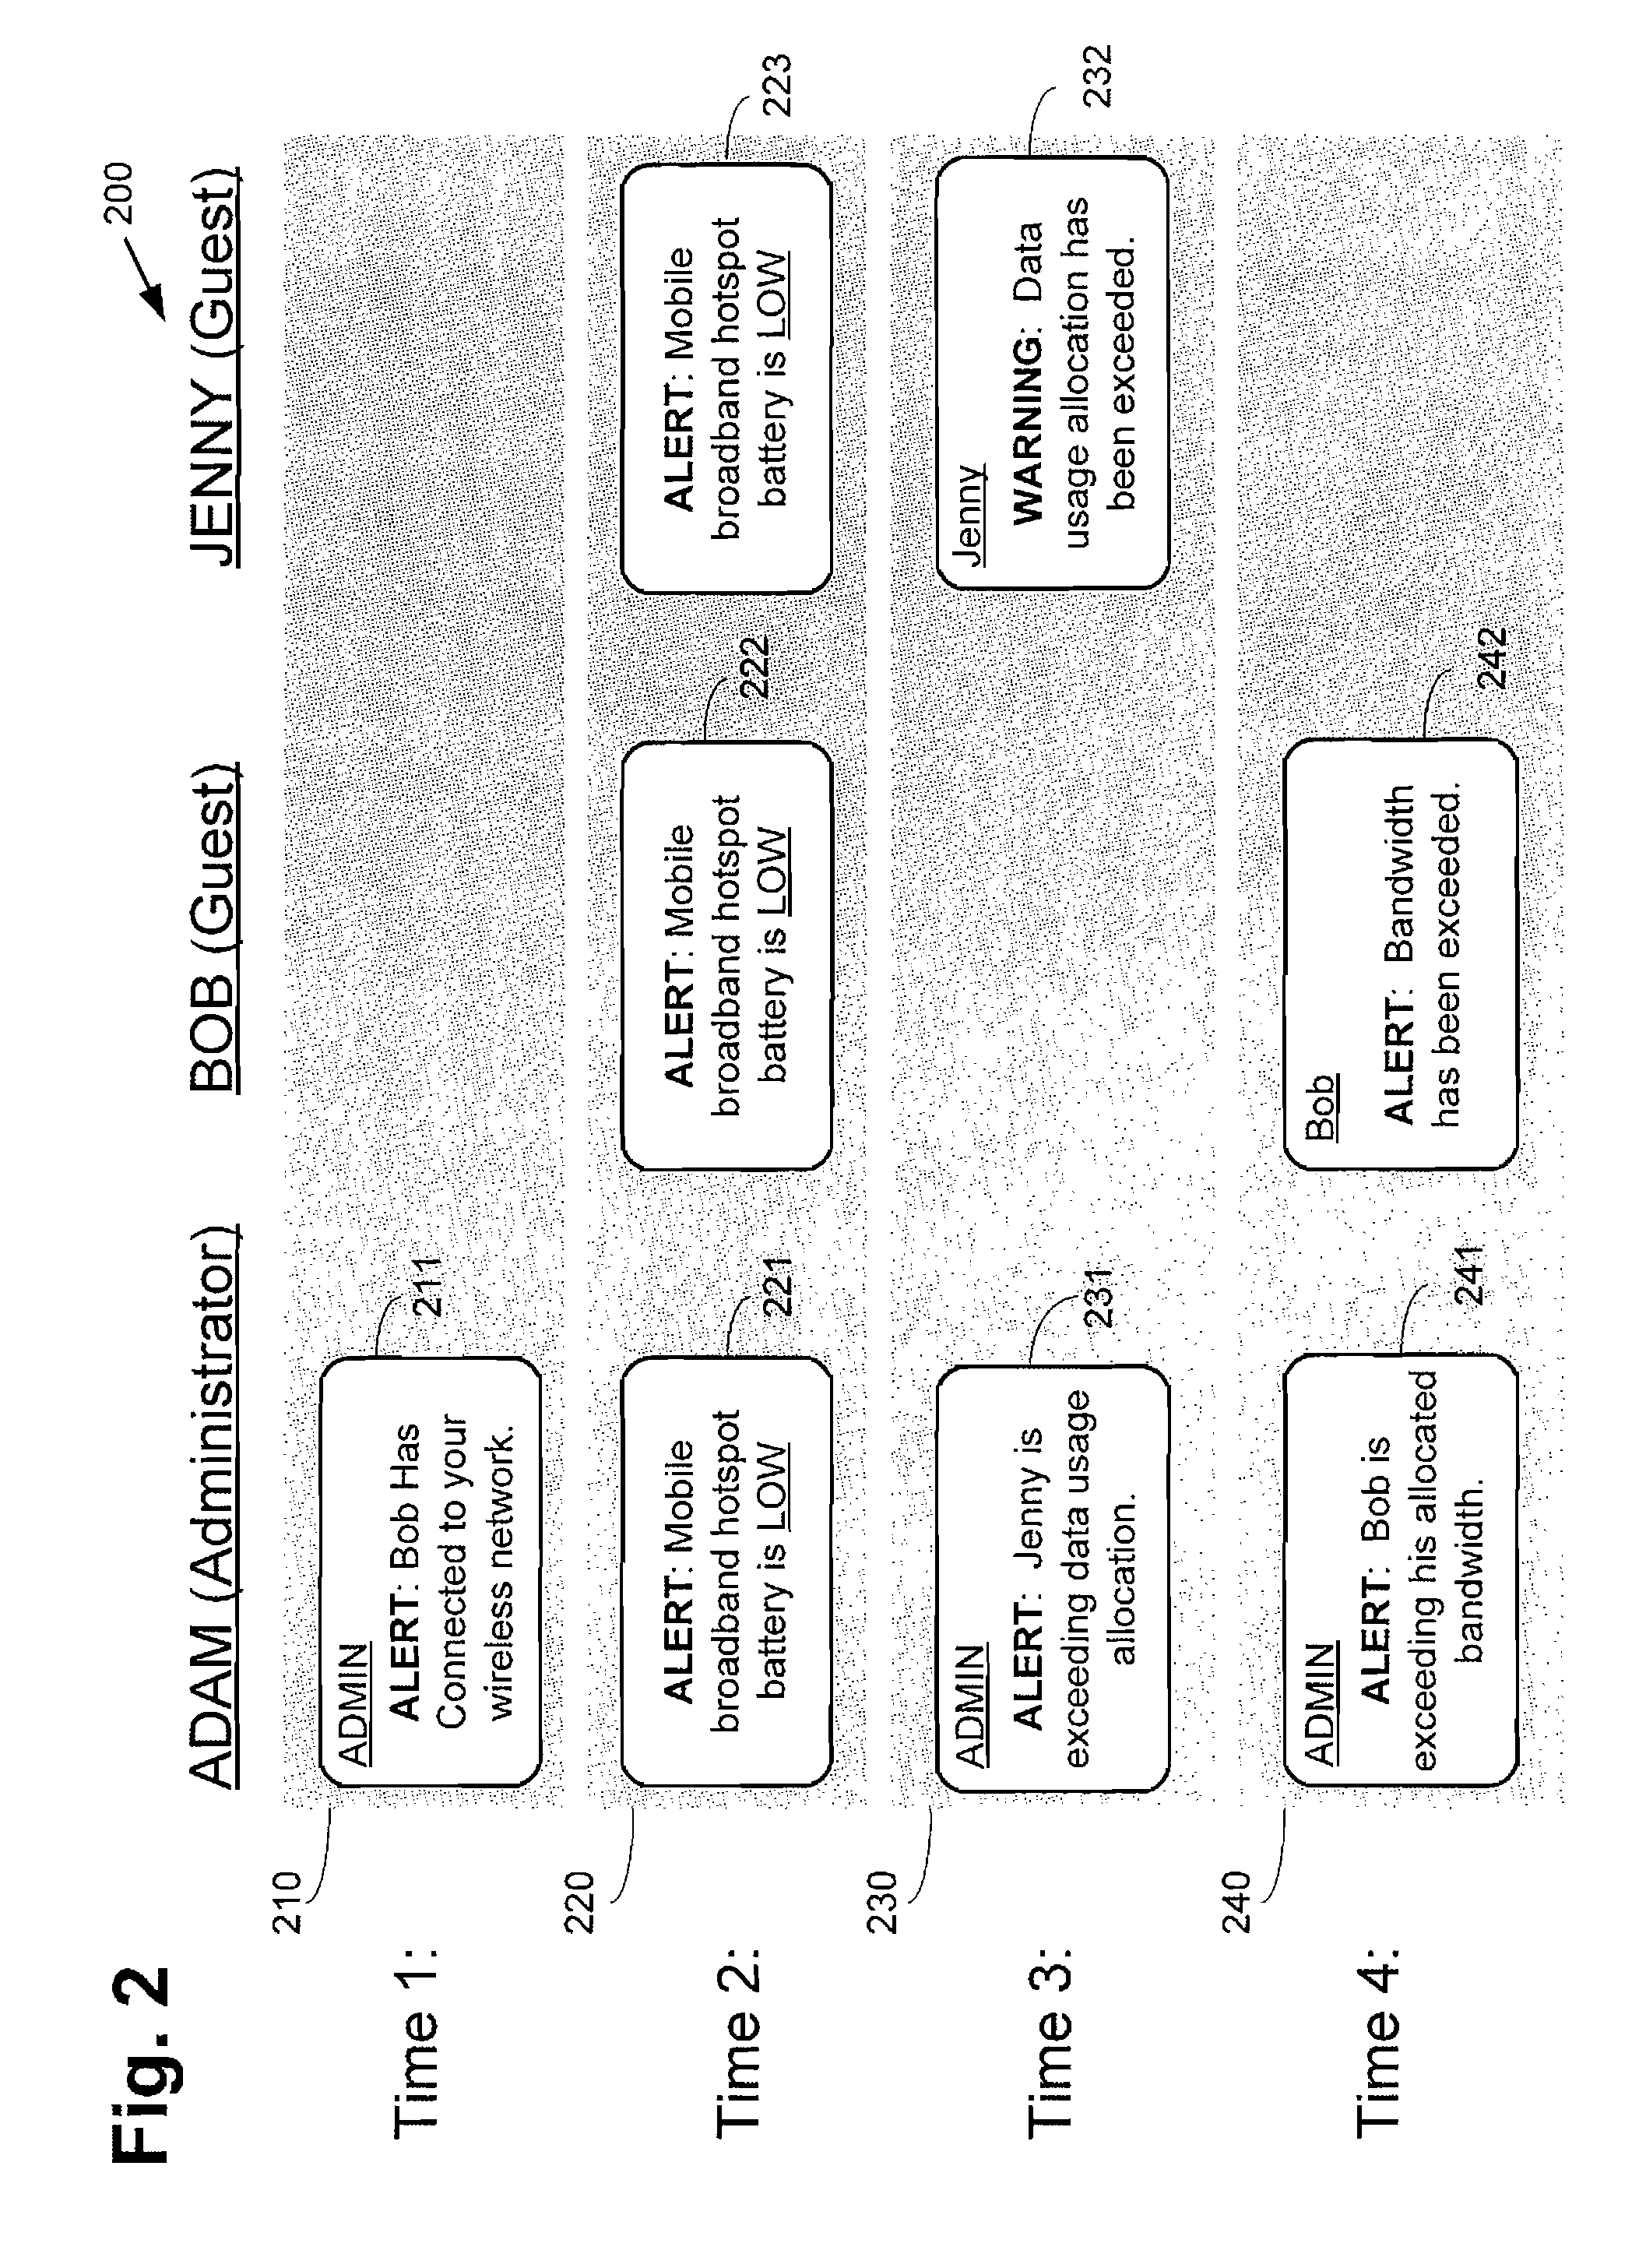 System and Method Managing Hotspot Network Access of a Plurality of Devices